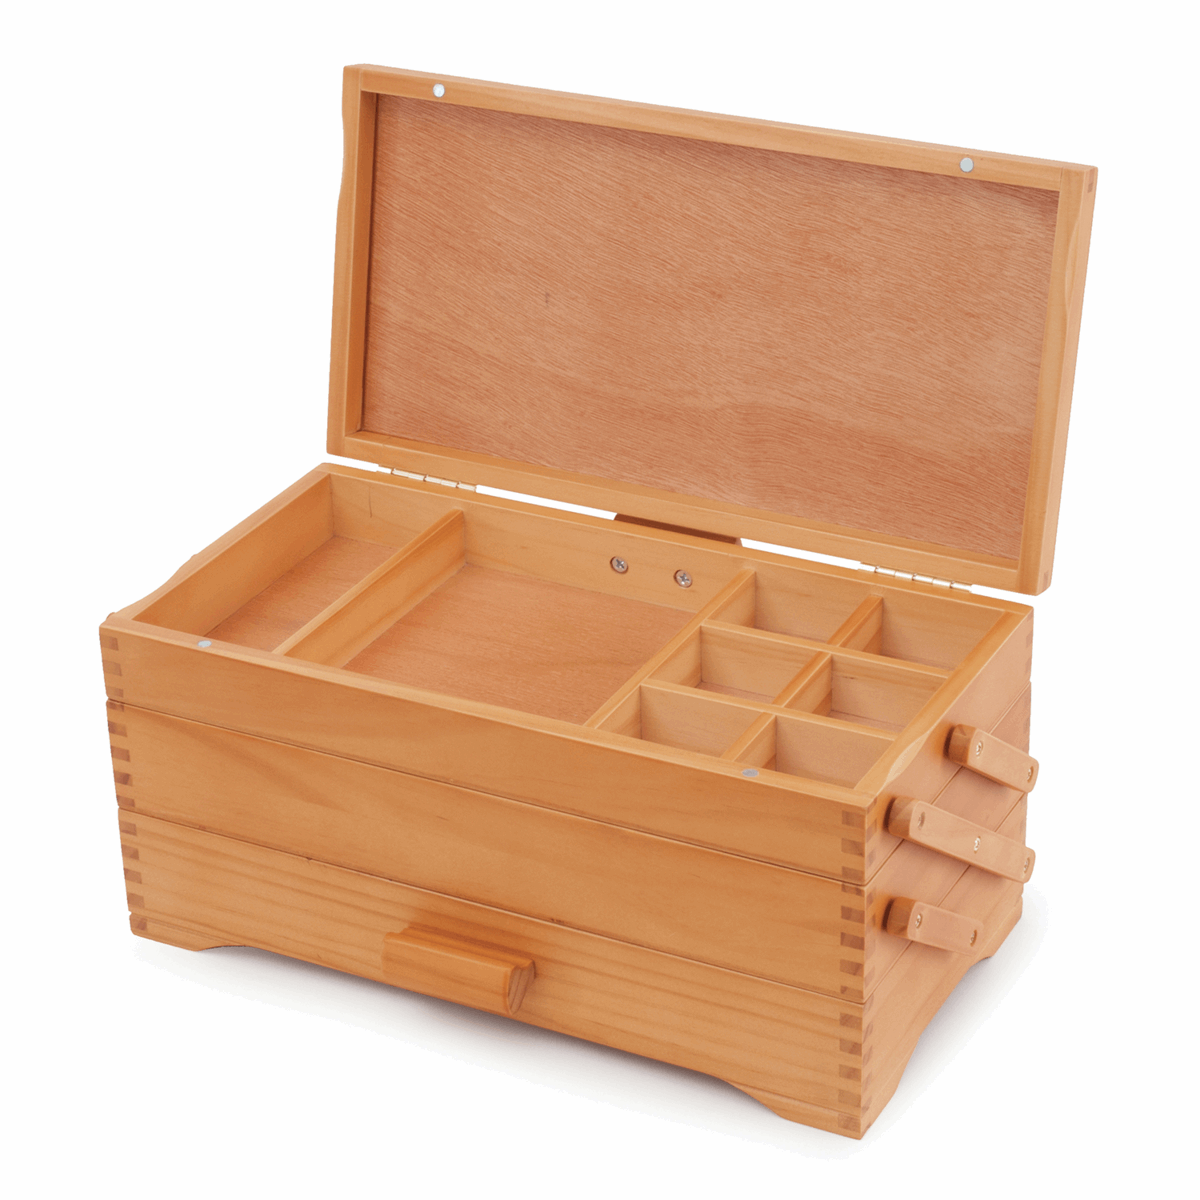 Craft Box - Cantilever Pine Wood